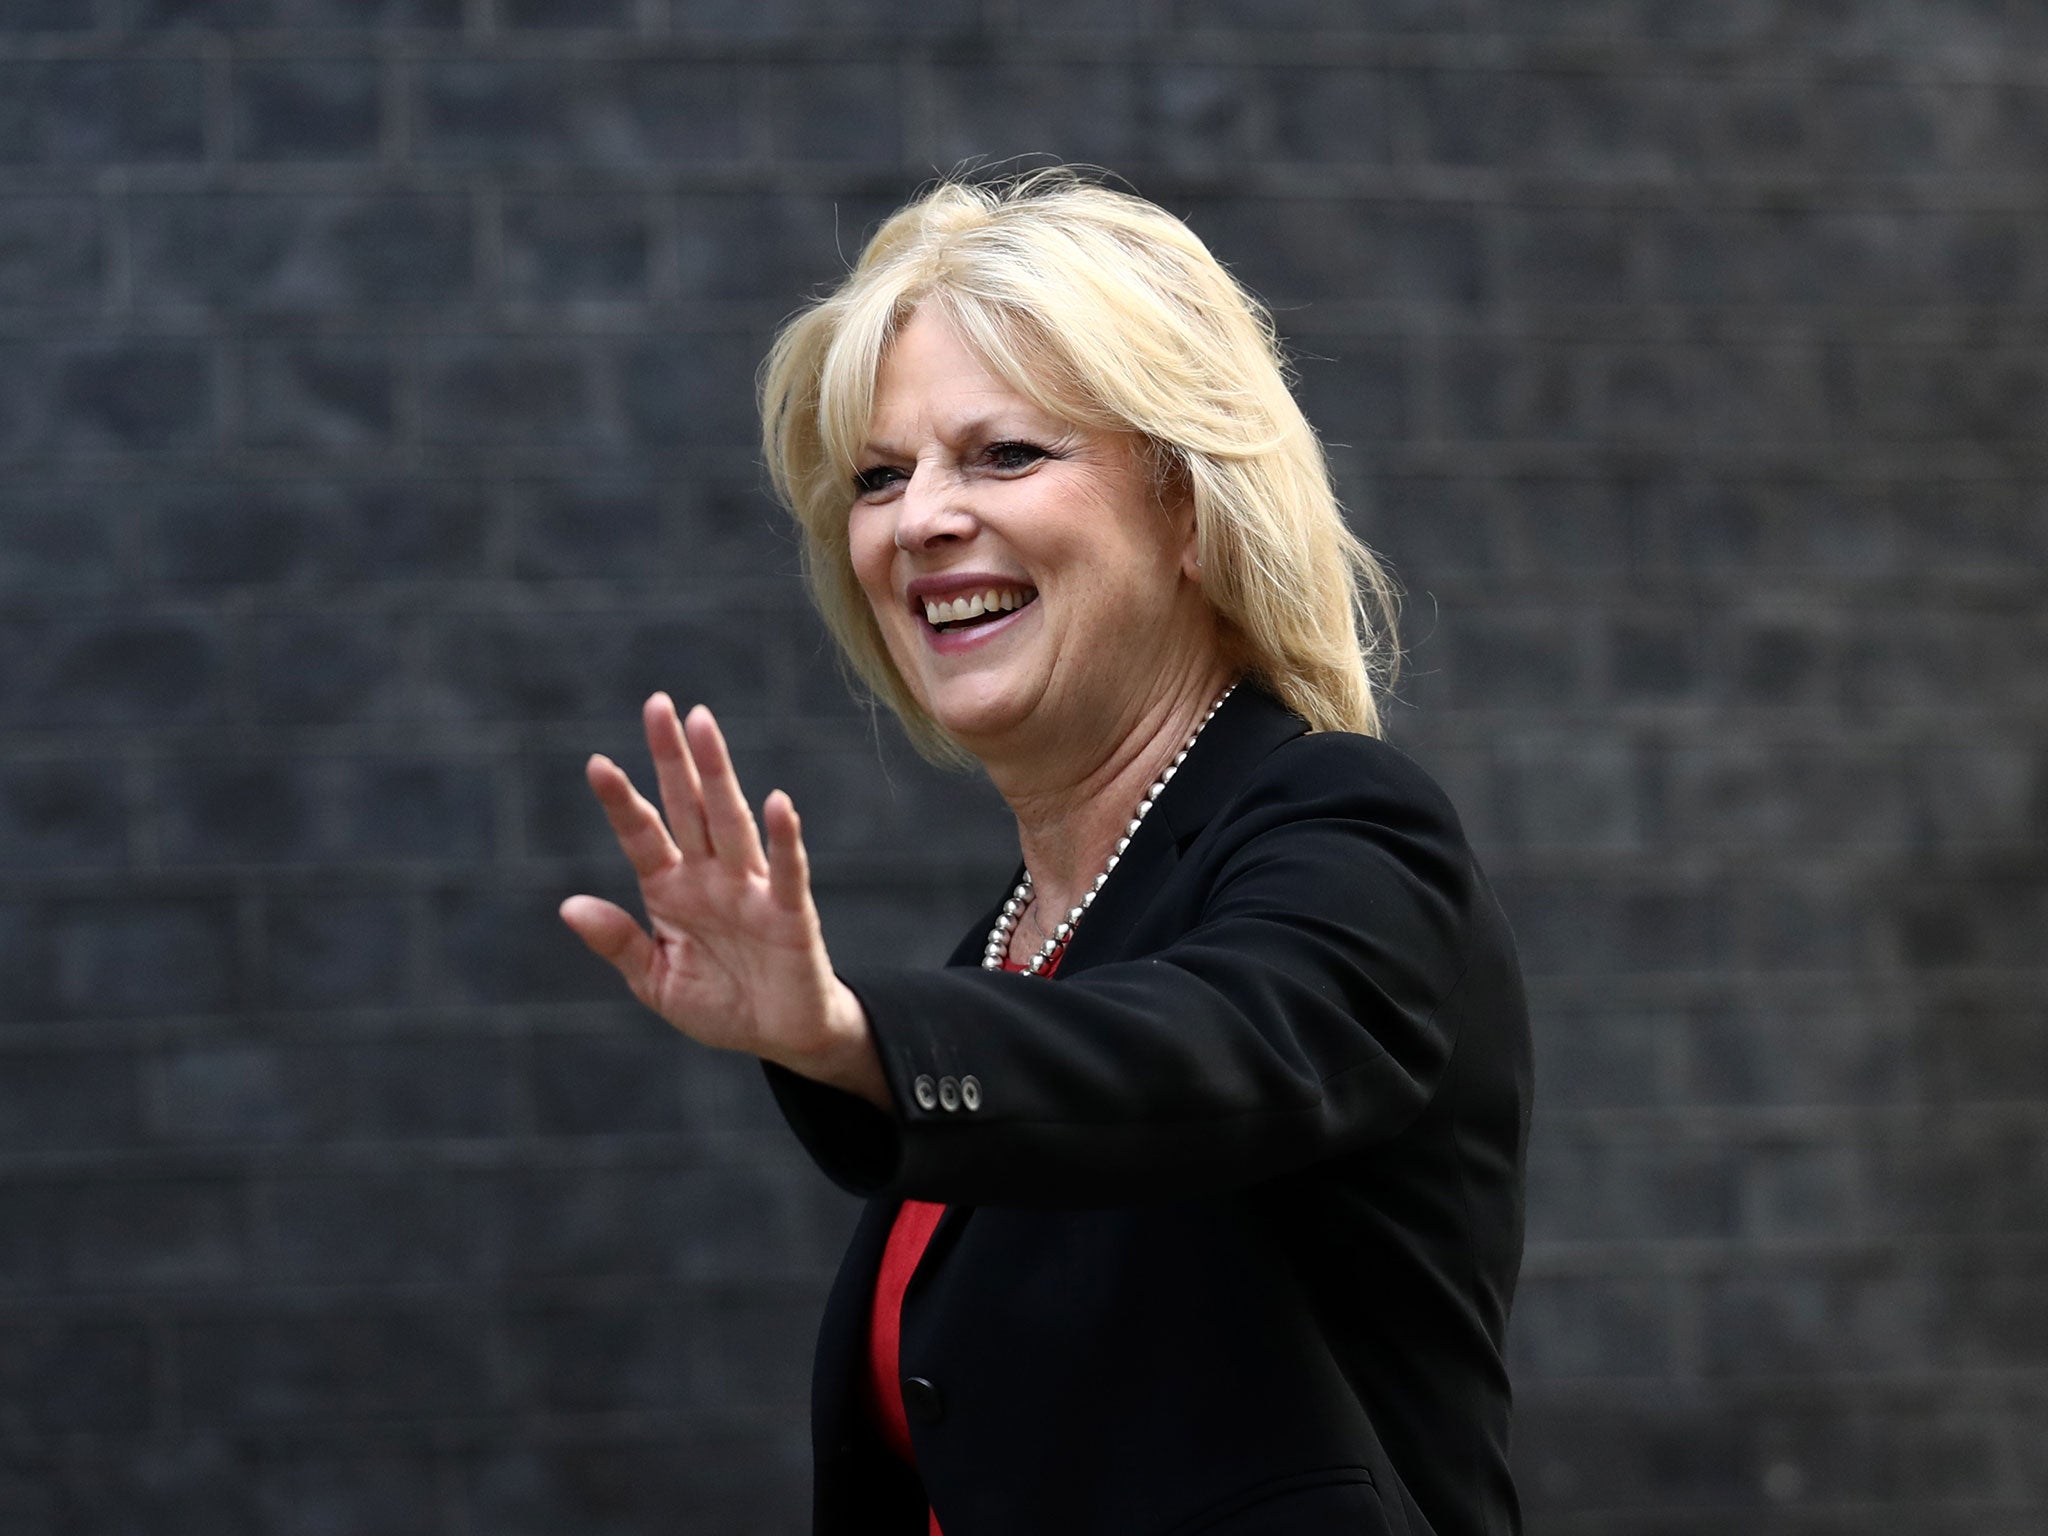 Anna Soubry said, ‘The people, not the hardline Brexiteers, are in charge’